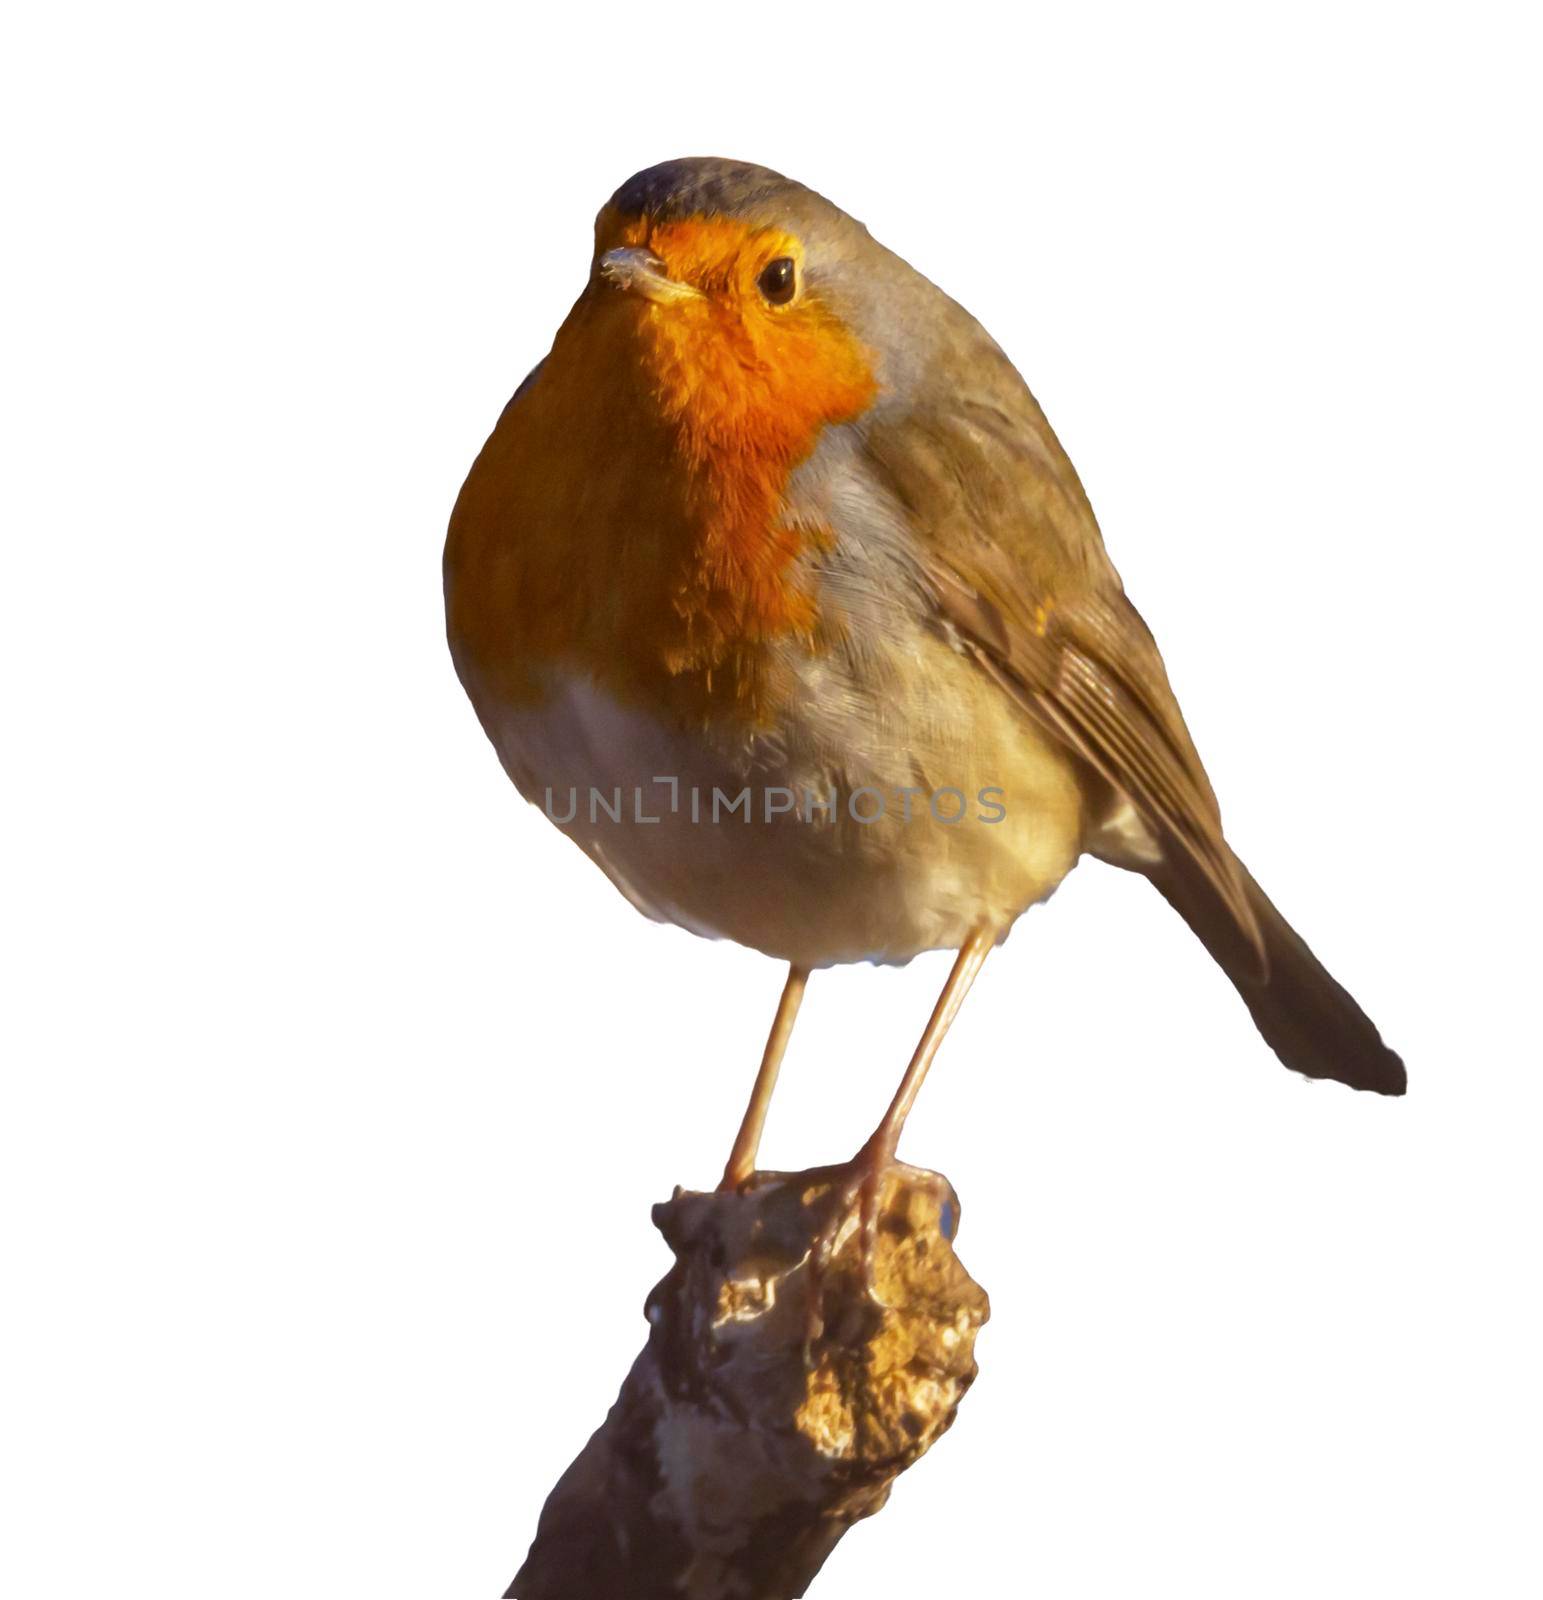 European robin, Erithacus rubecula, or robin redbreast, perched on a branch in white background by Elenaphotos21